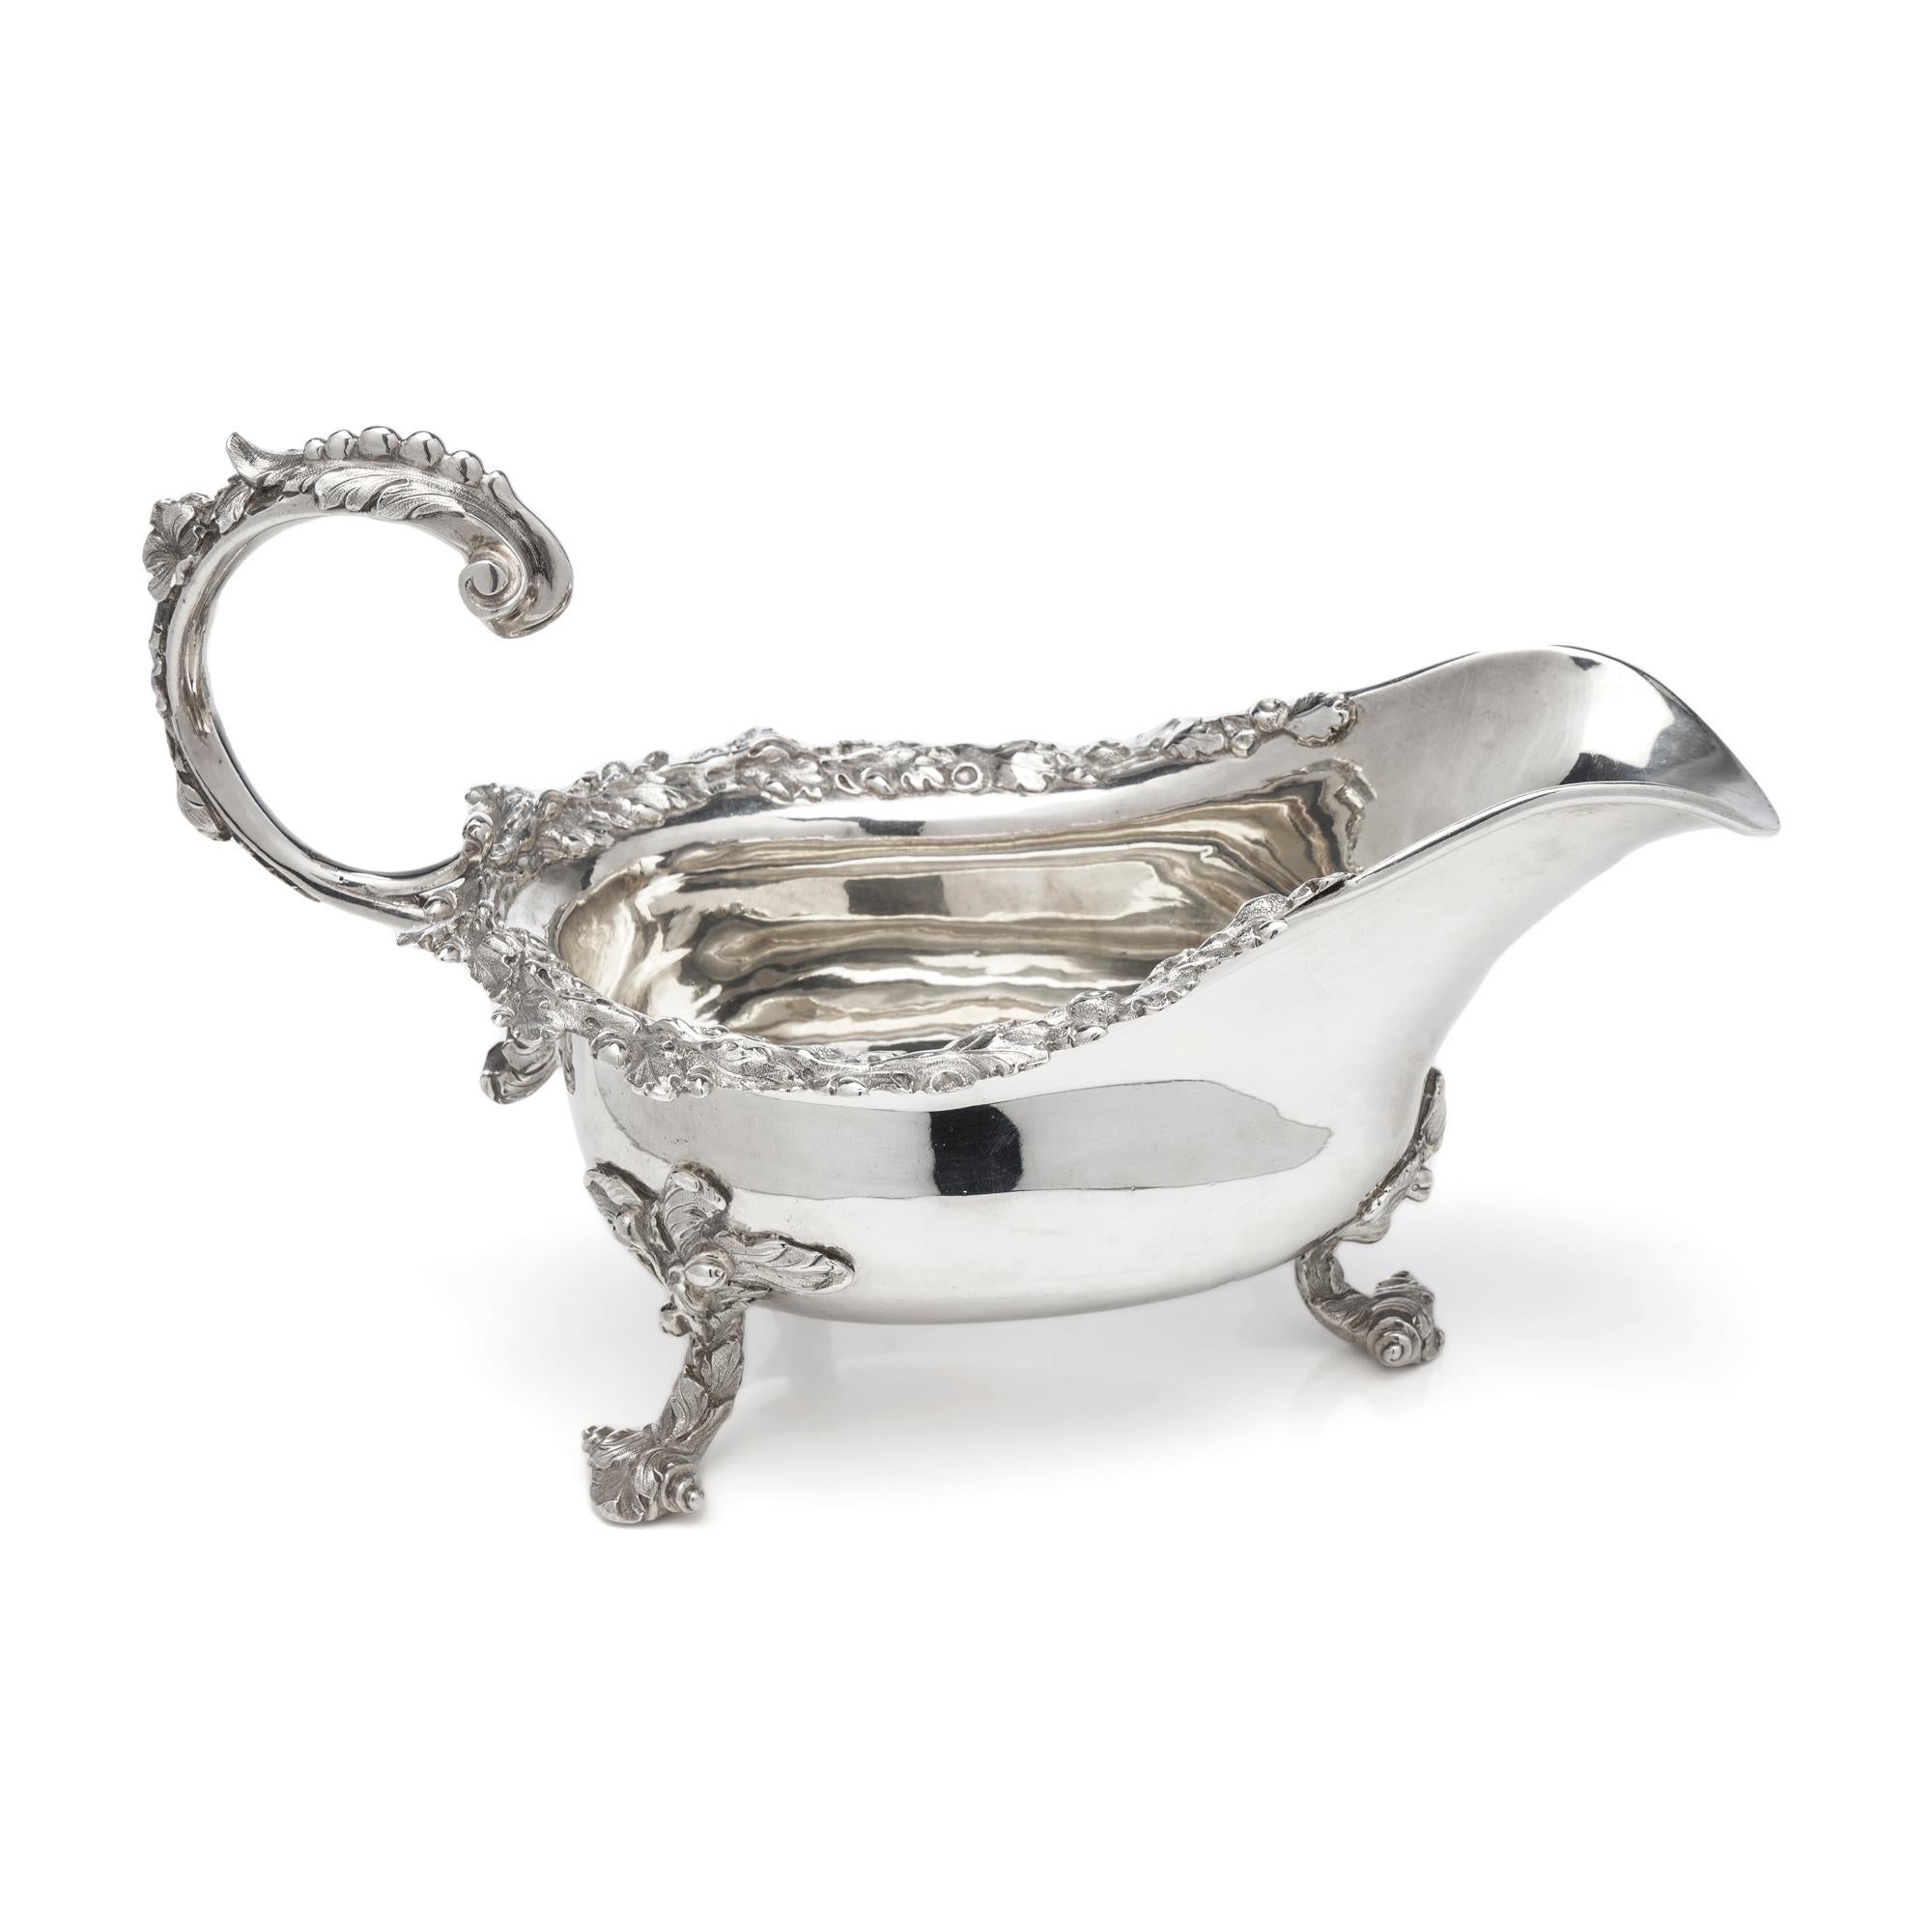 Georgian Sterling Silver Chased Sauce Boat, James Arthur, London, 1827 In Good Condition For Sale In Braintree, GB